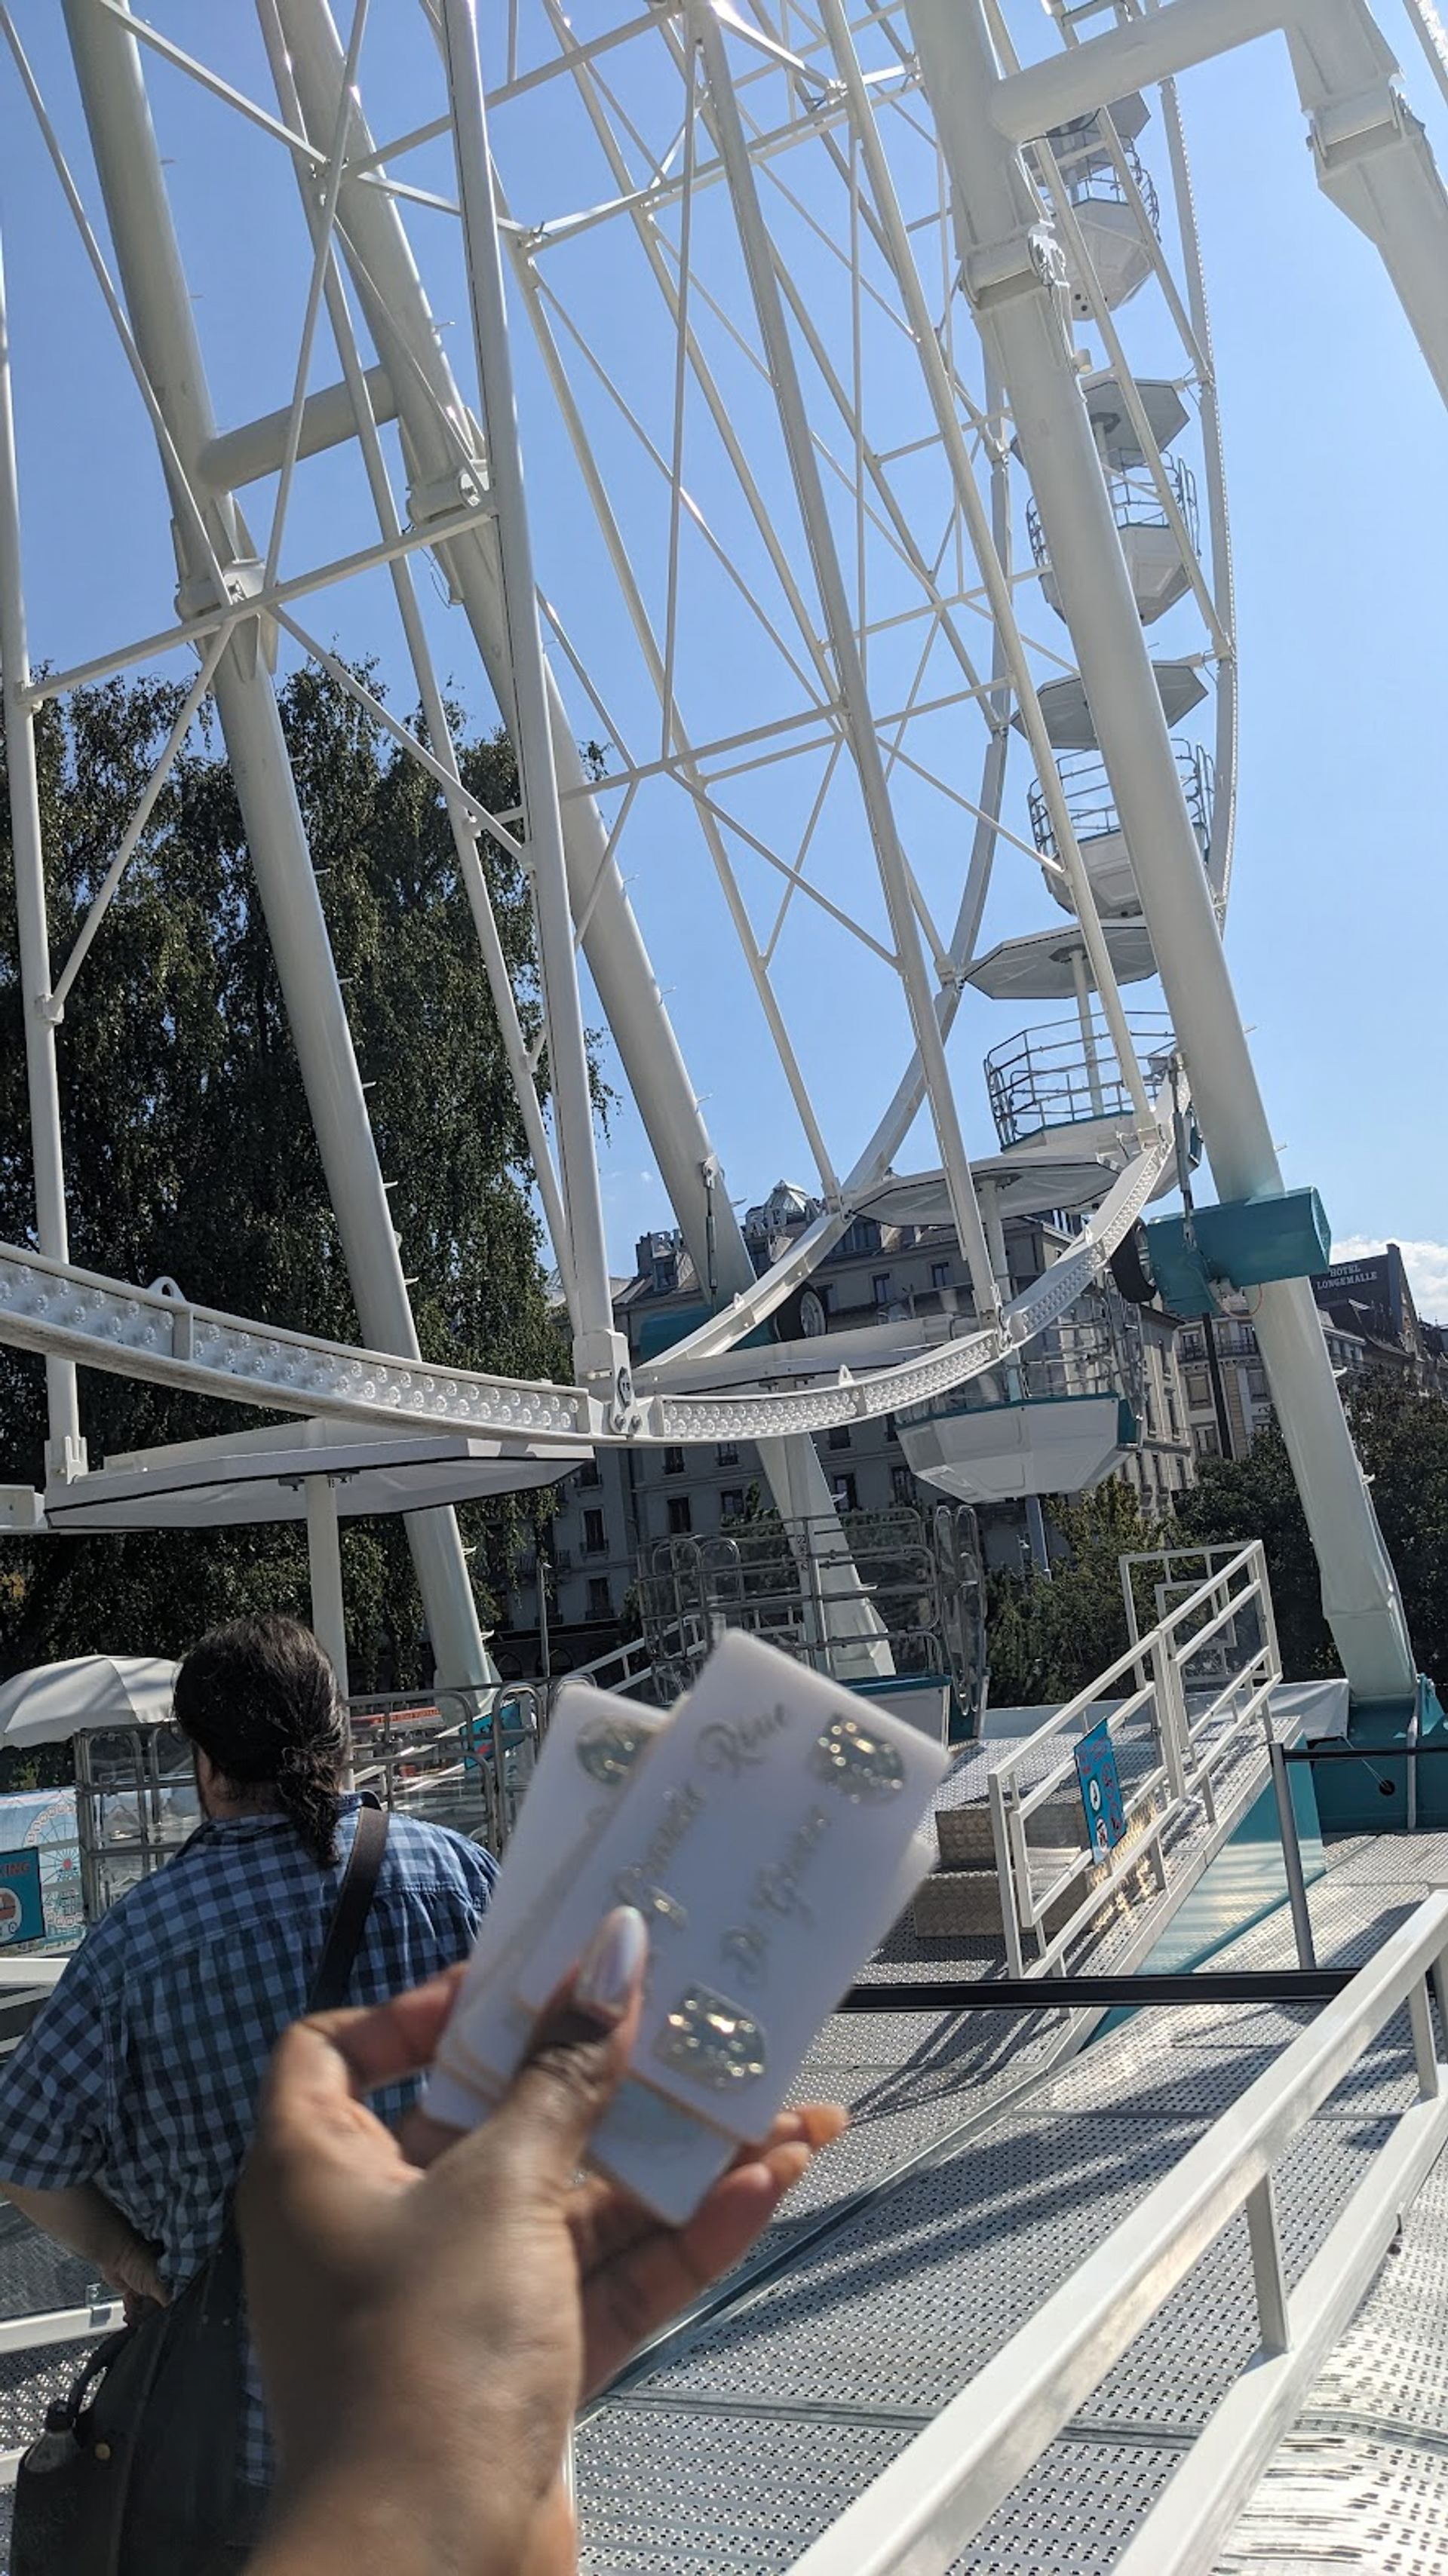 Dana holding the access cards to the ferris wheel